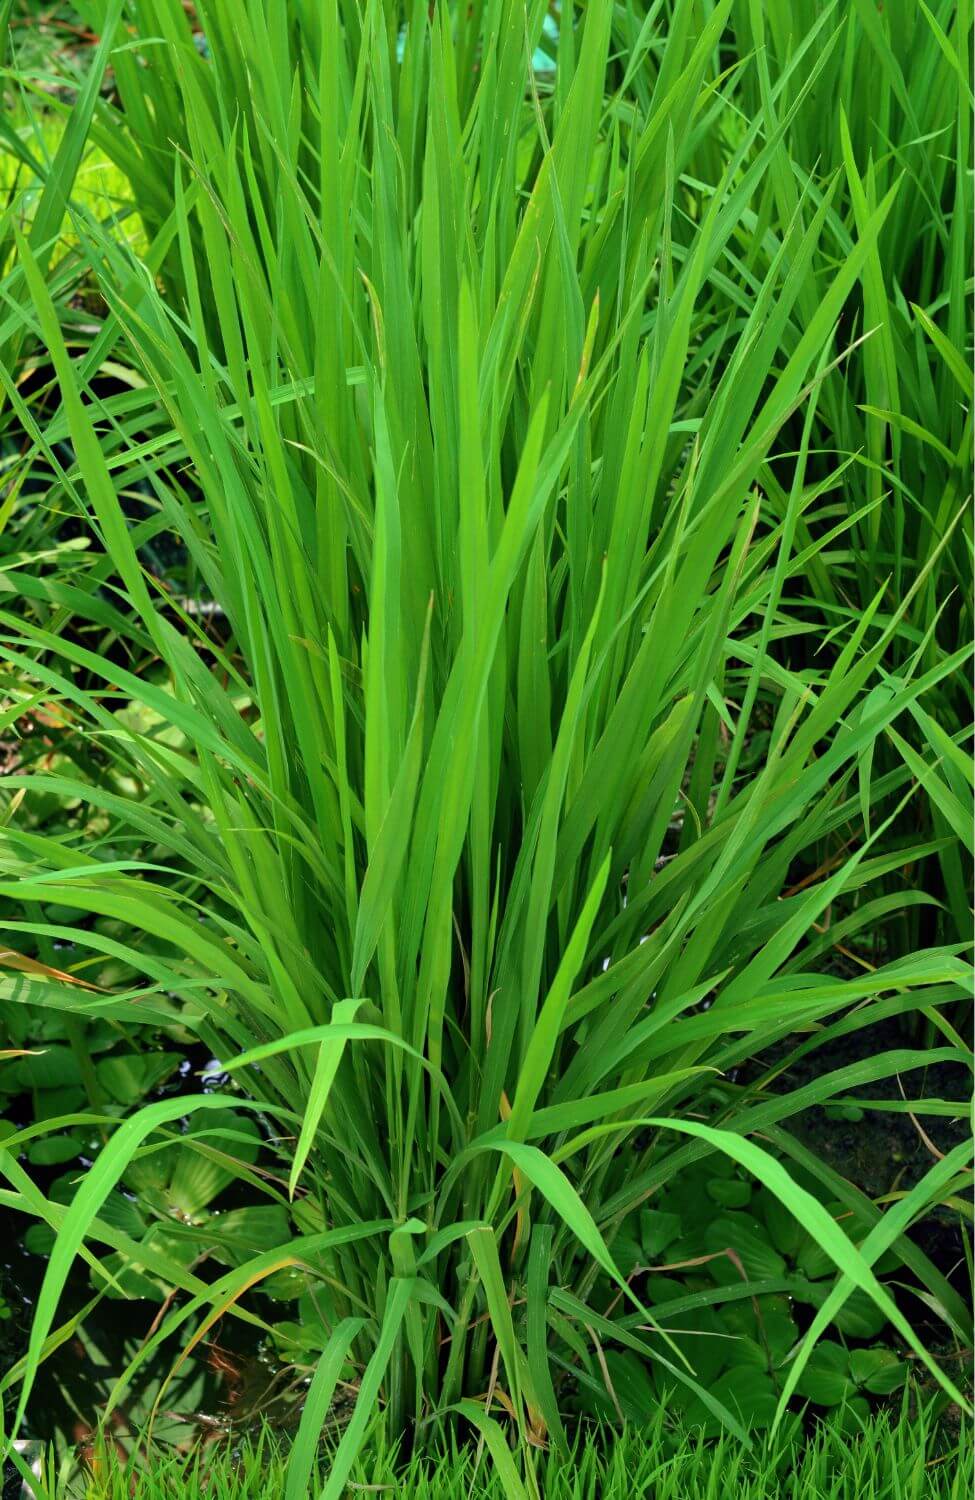 Organic Lemongrass Seeds - Cultivate your own fragrant and flavorful herb garden